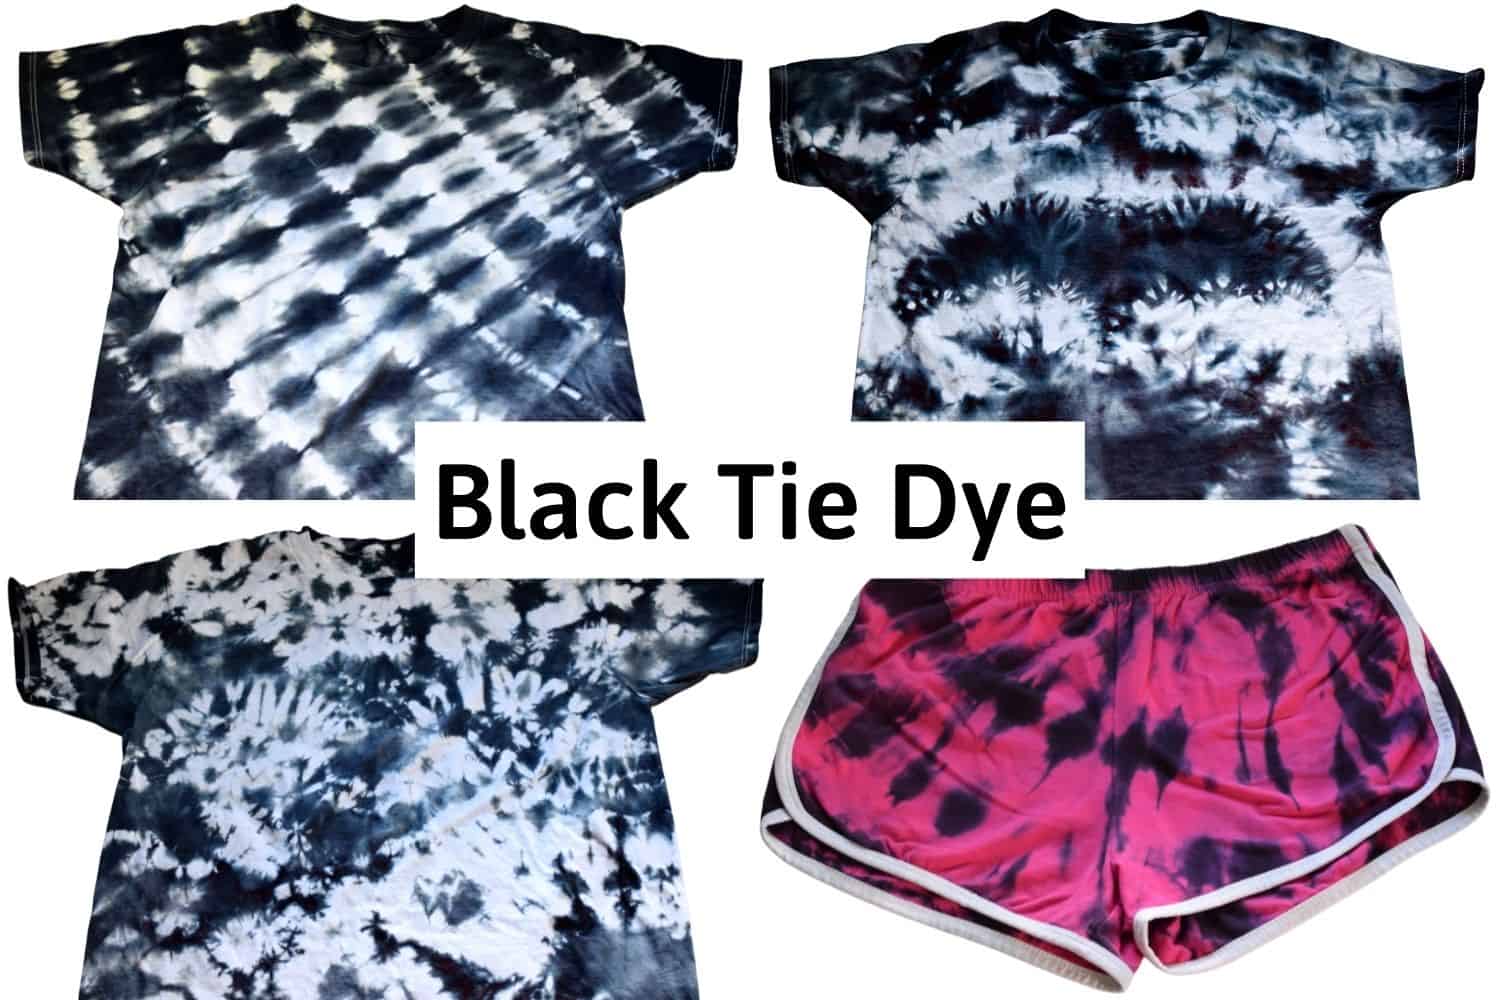 Black Tie Dye - 4 Black Tie Dye Designs for Shirts and Clothes